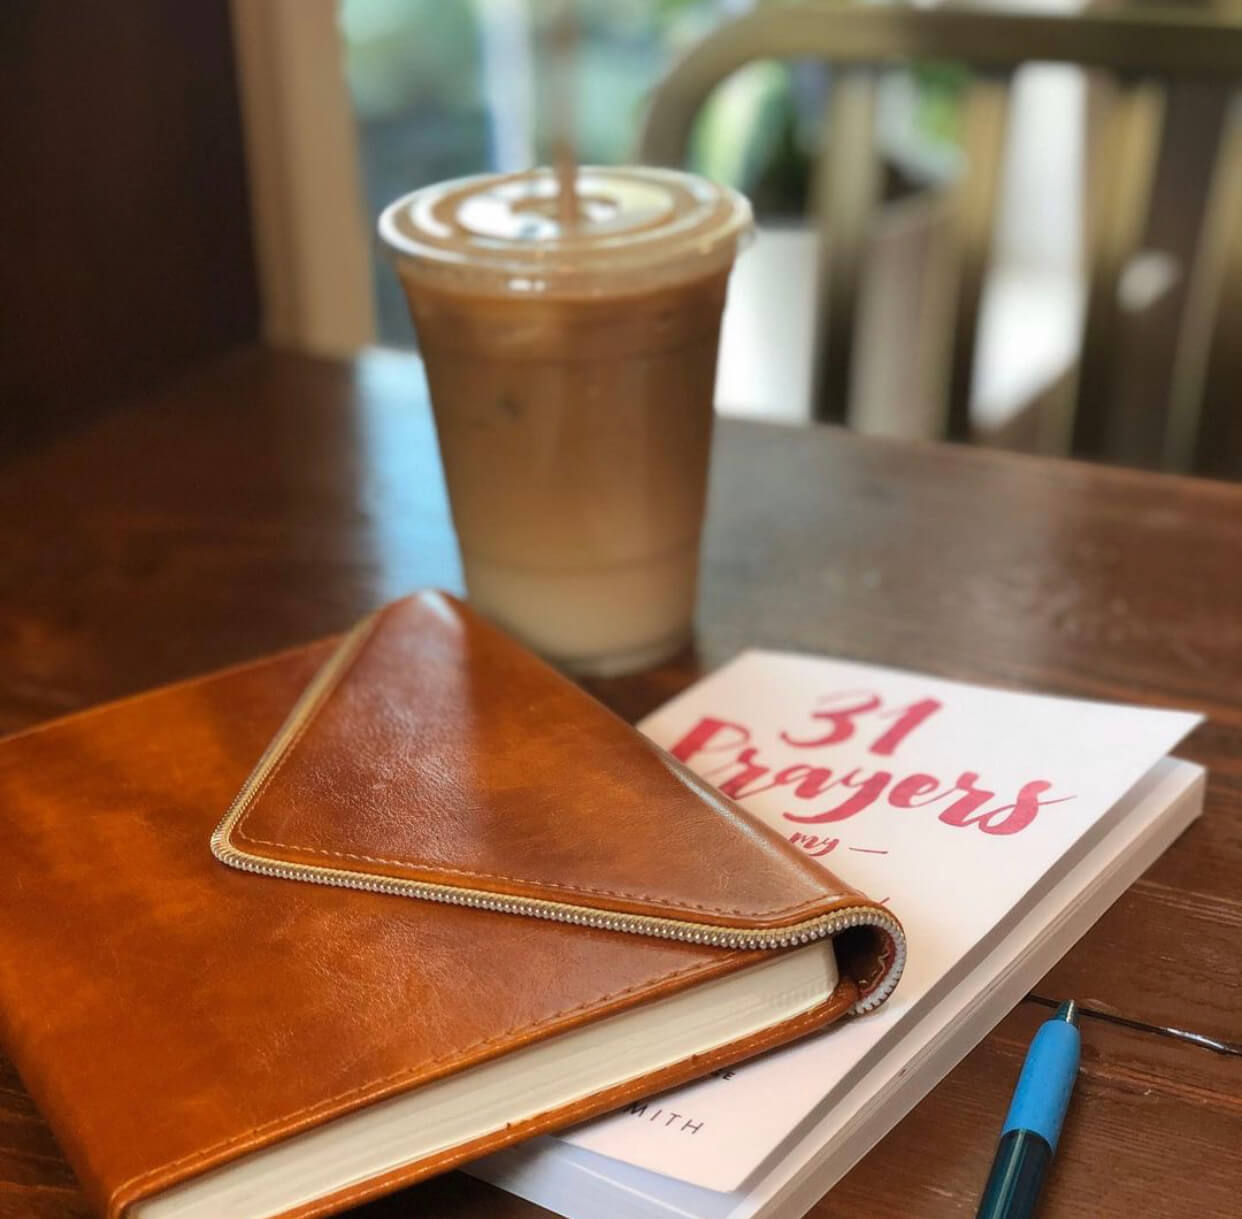 A book next to coffee